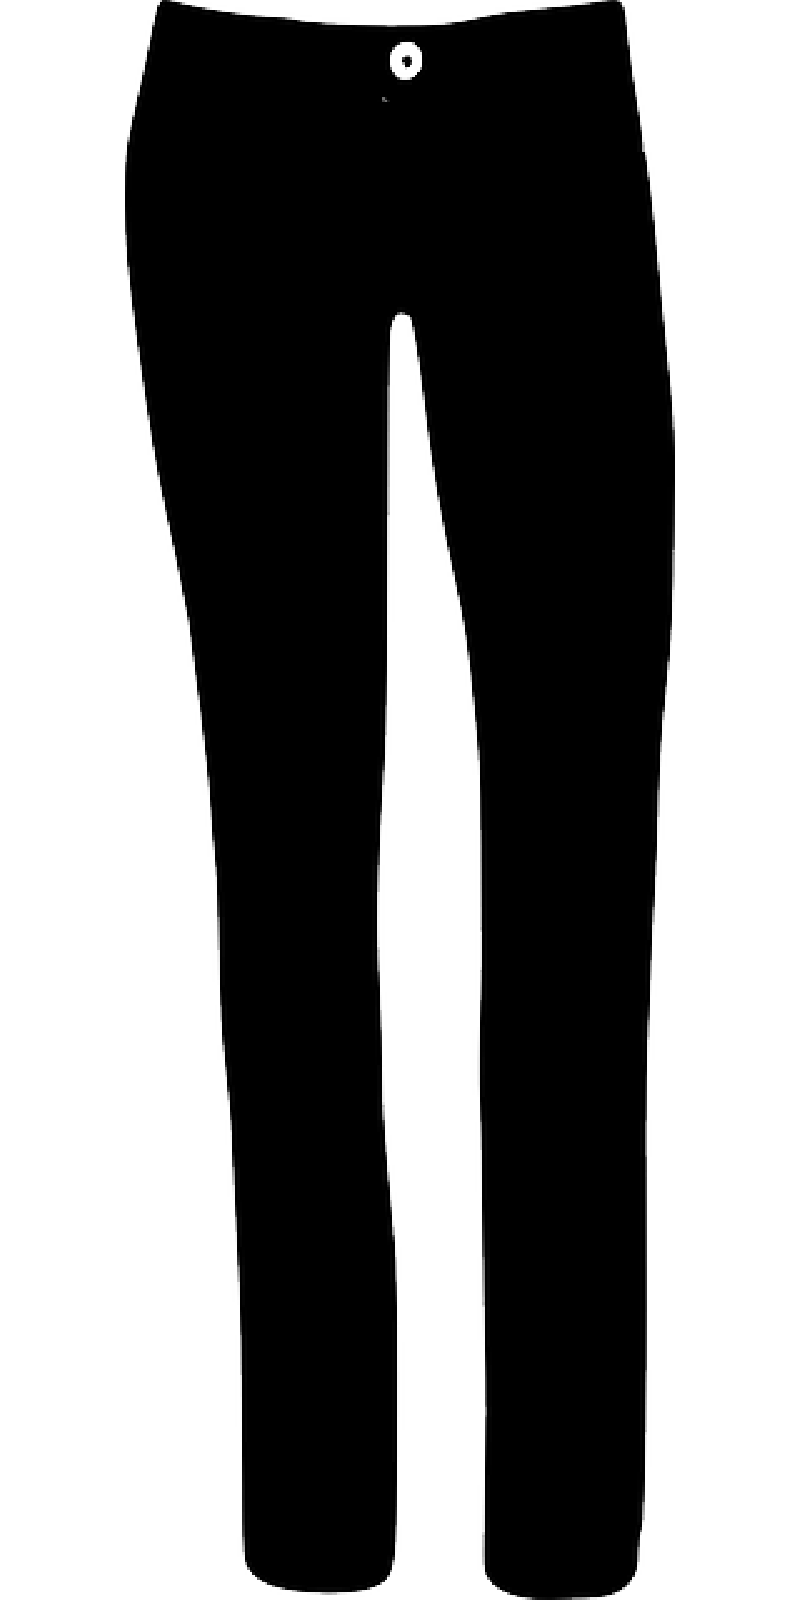 Trouser png images.